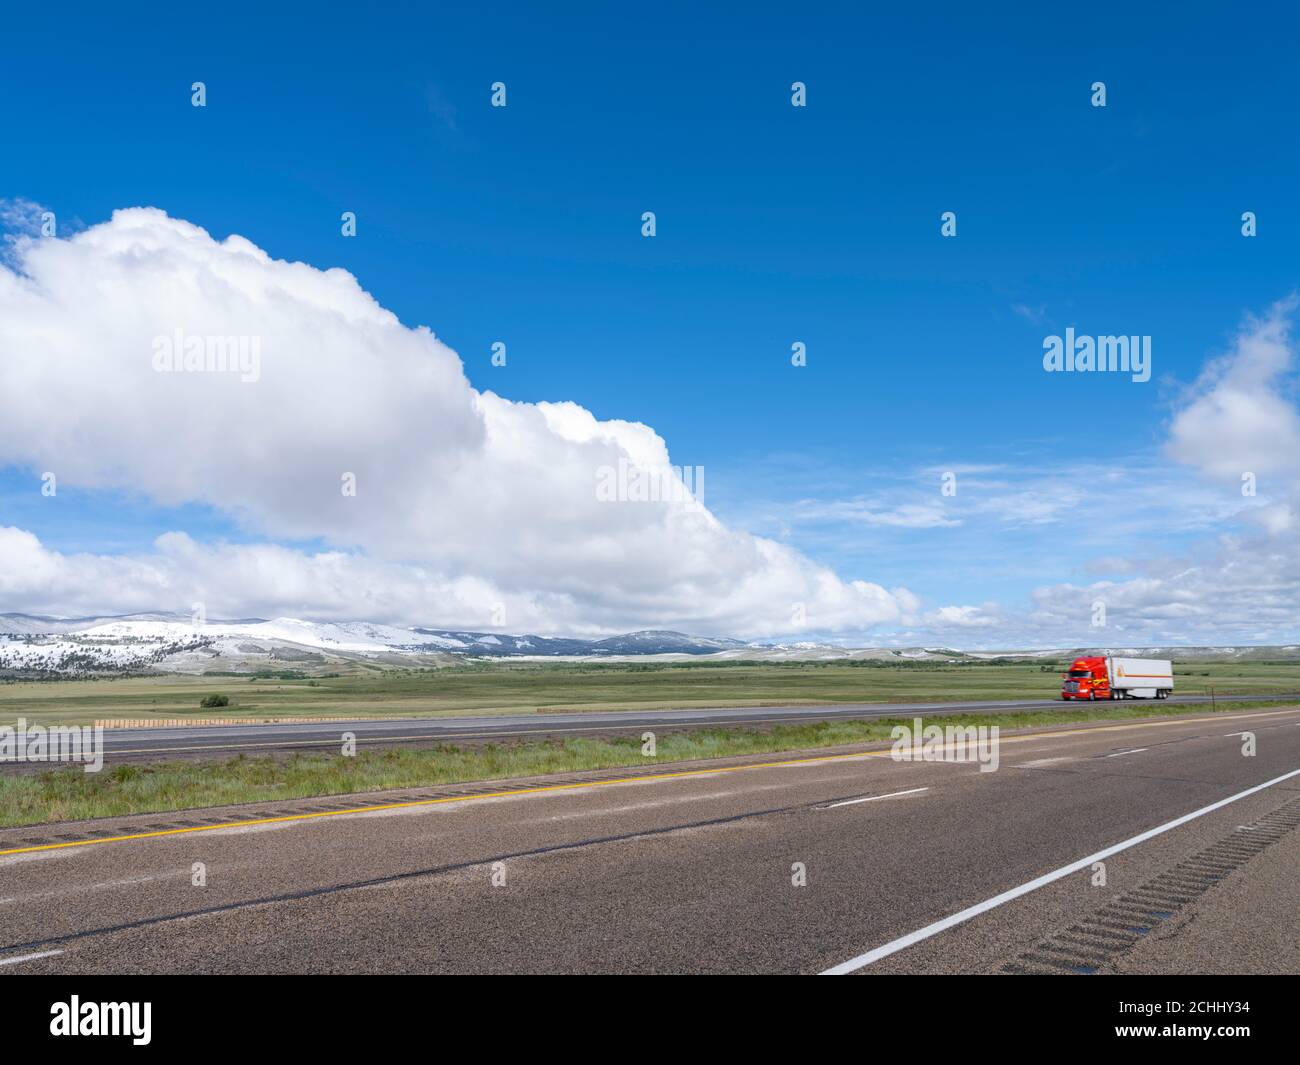 Red truck wide open spaces on highway, Laramie Wyoming USA Stock Photo